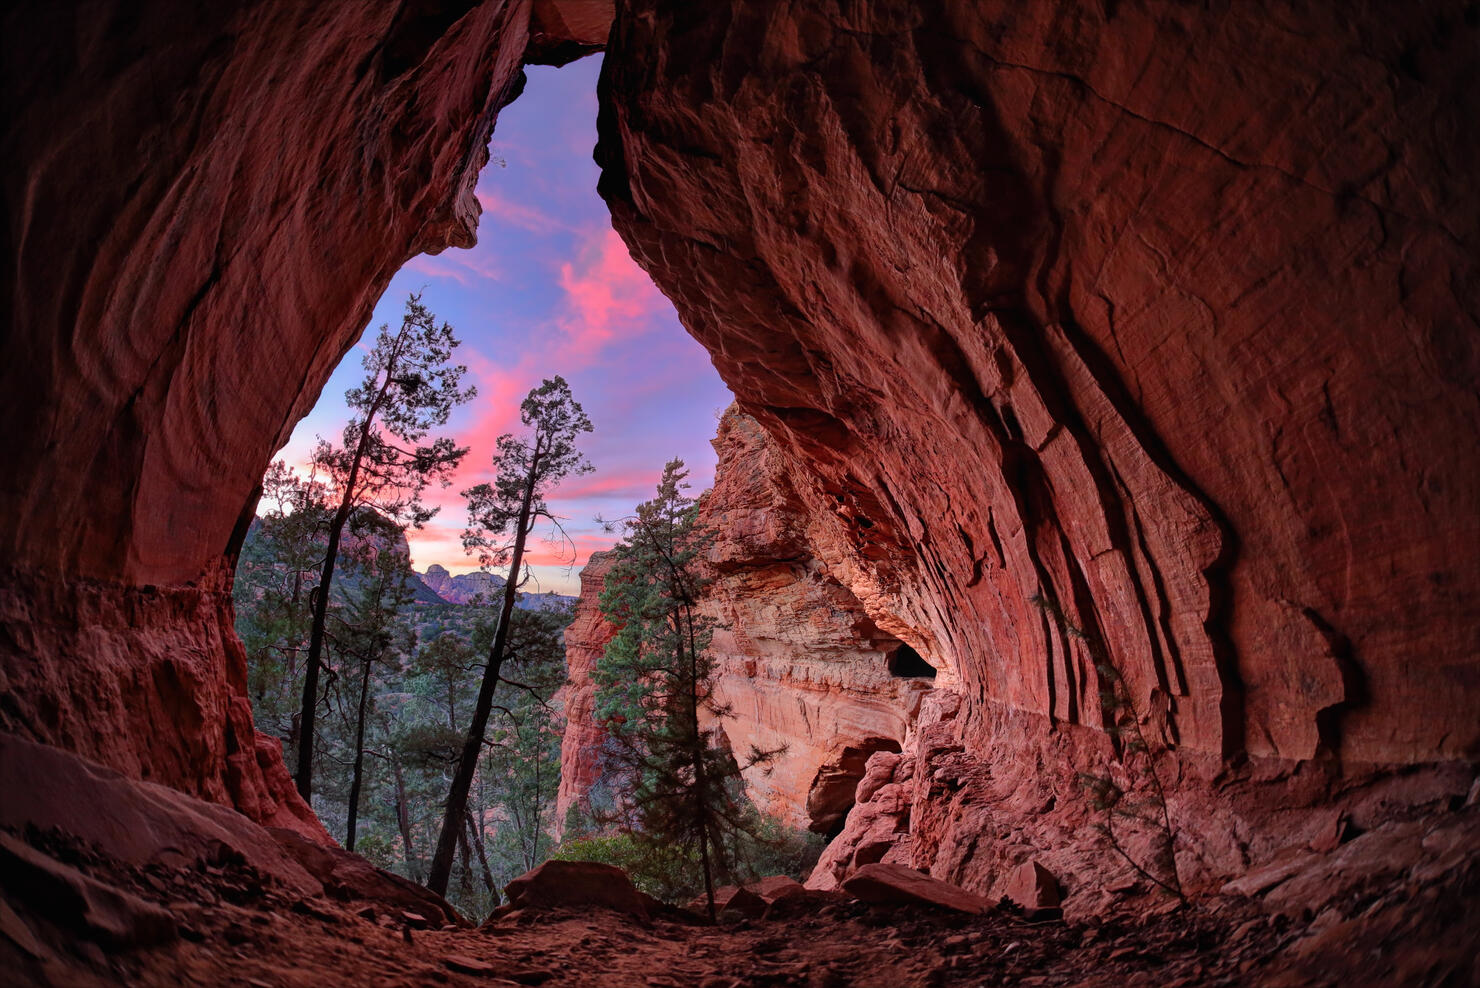 Trees And Sky Seen Through Cave During Sunset